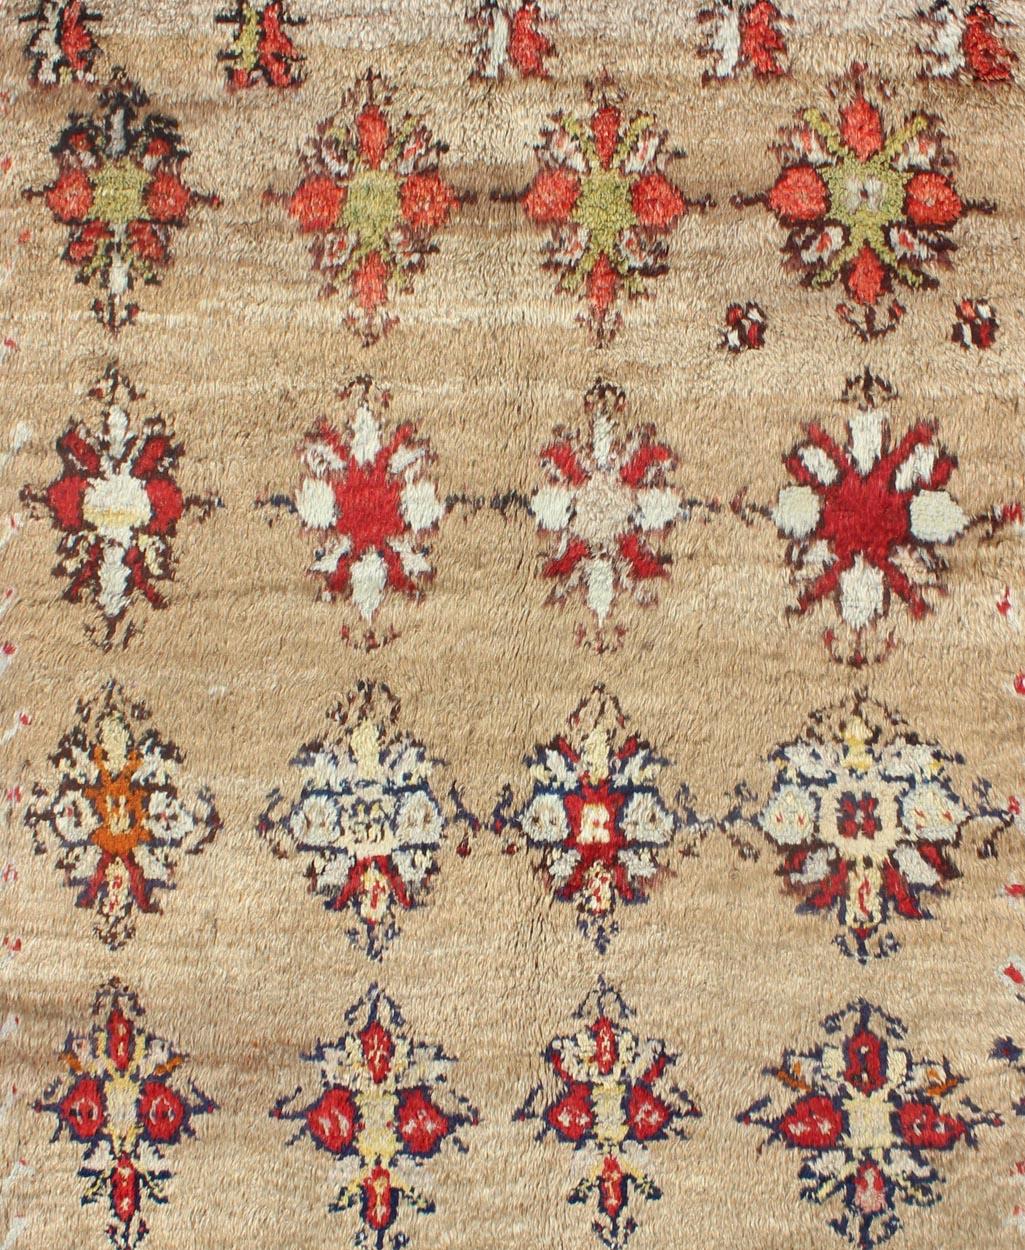 Hand-Knotted Angora Turkish Tulu Carpet with Colorful Floral Designs Set on Sand Field For Sale